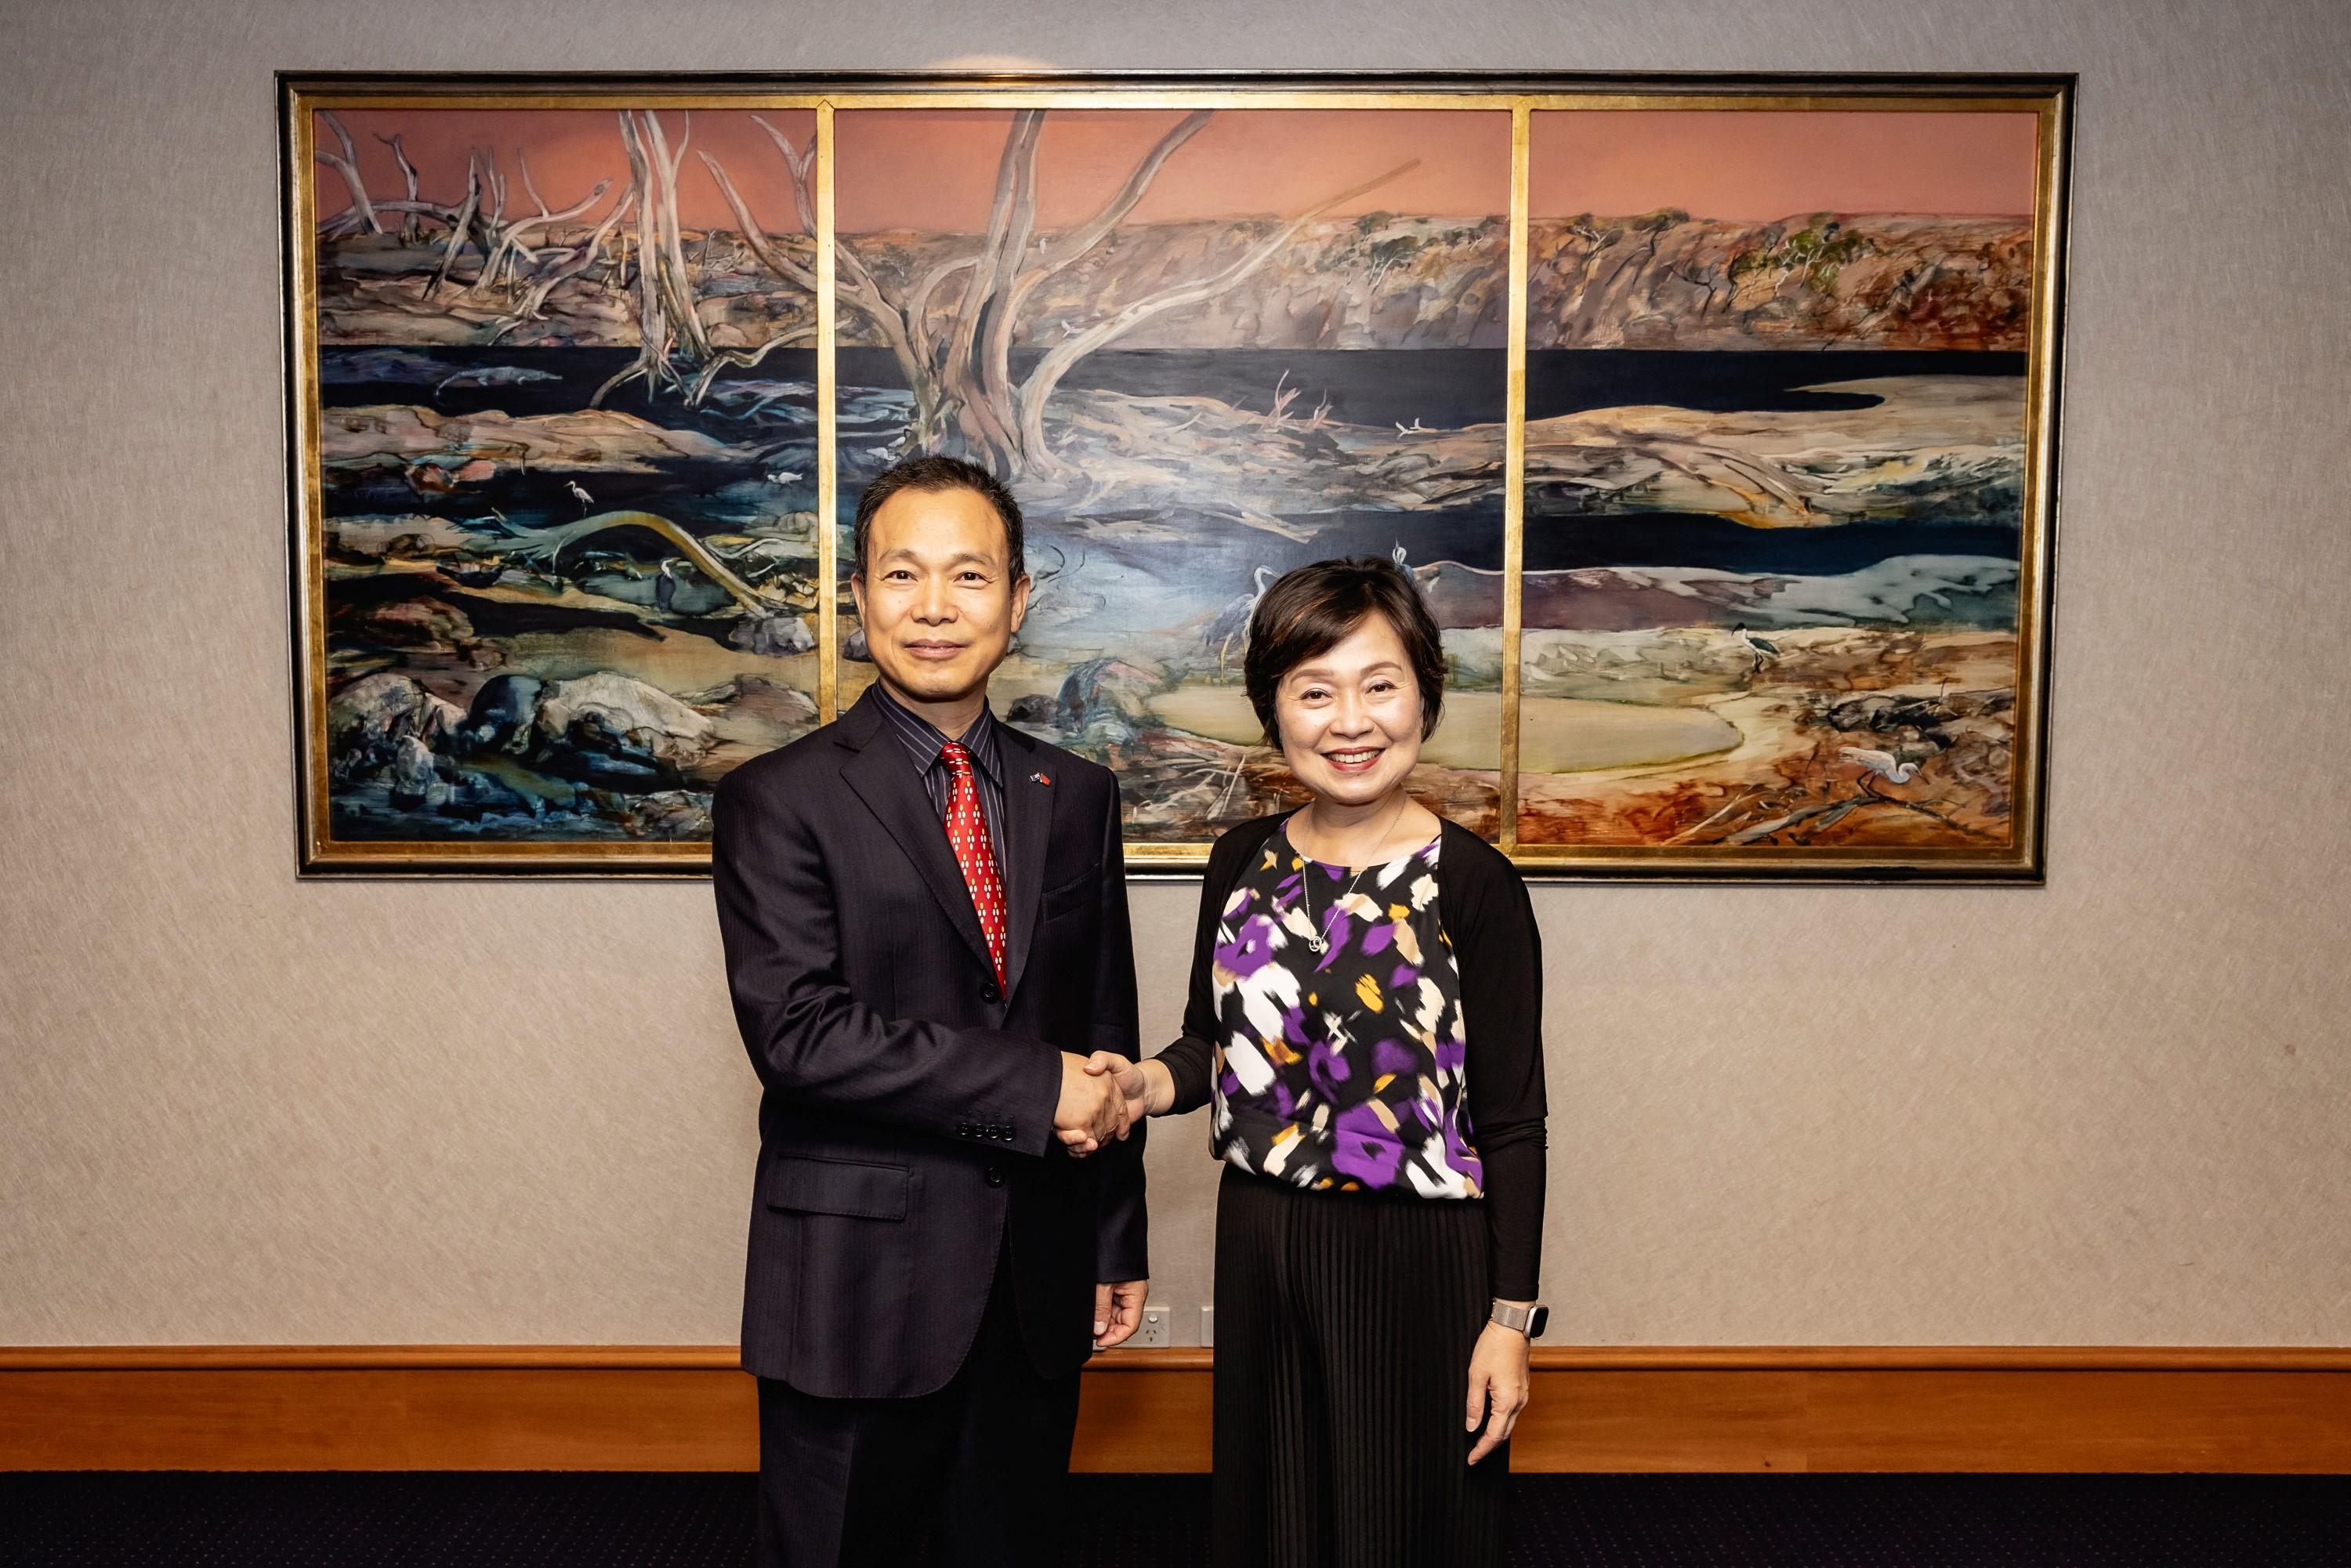 The Secretary for Education, Dr Choi Yuk-lin (right), pays a courtesy call on the Chinese Consul General in Perth, Mr Long Dingbin (left), in Perth, Australia, on March 7 (Perth time).